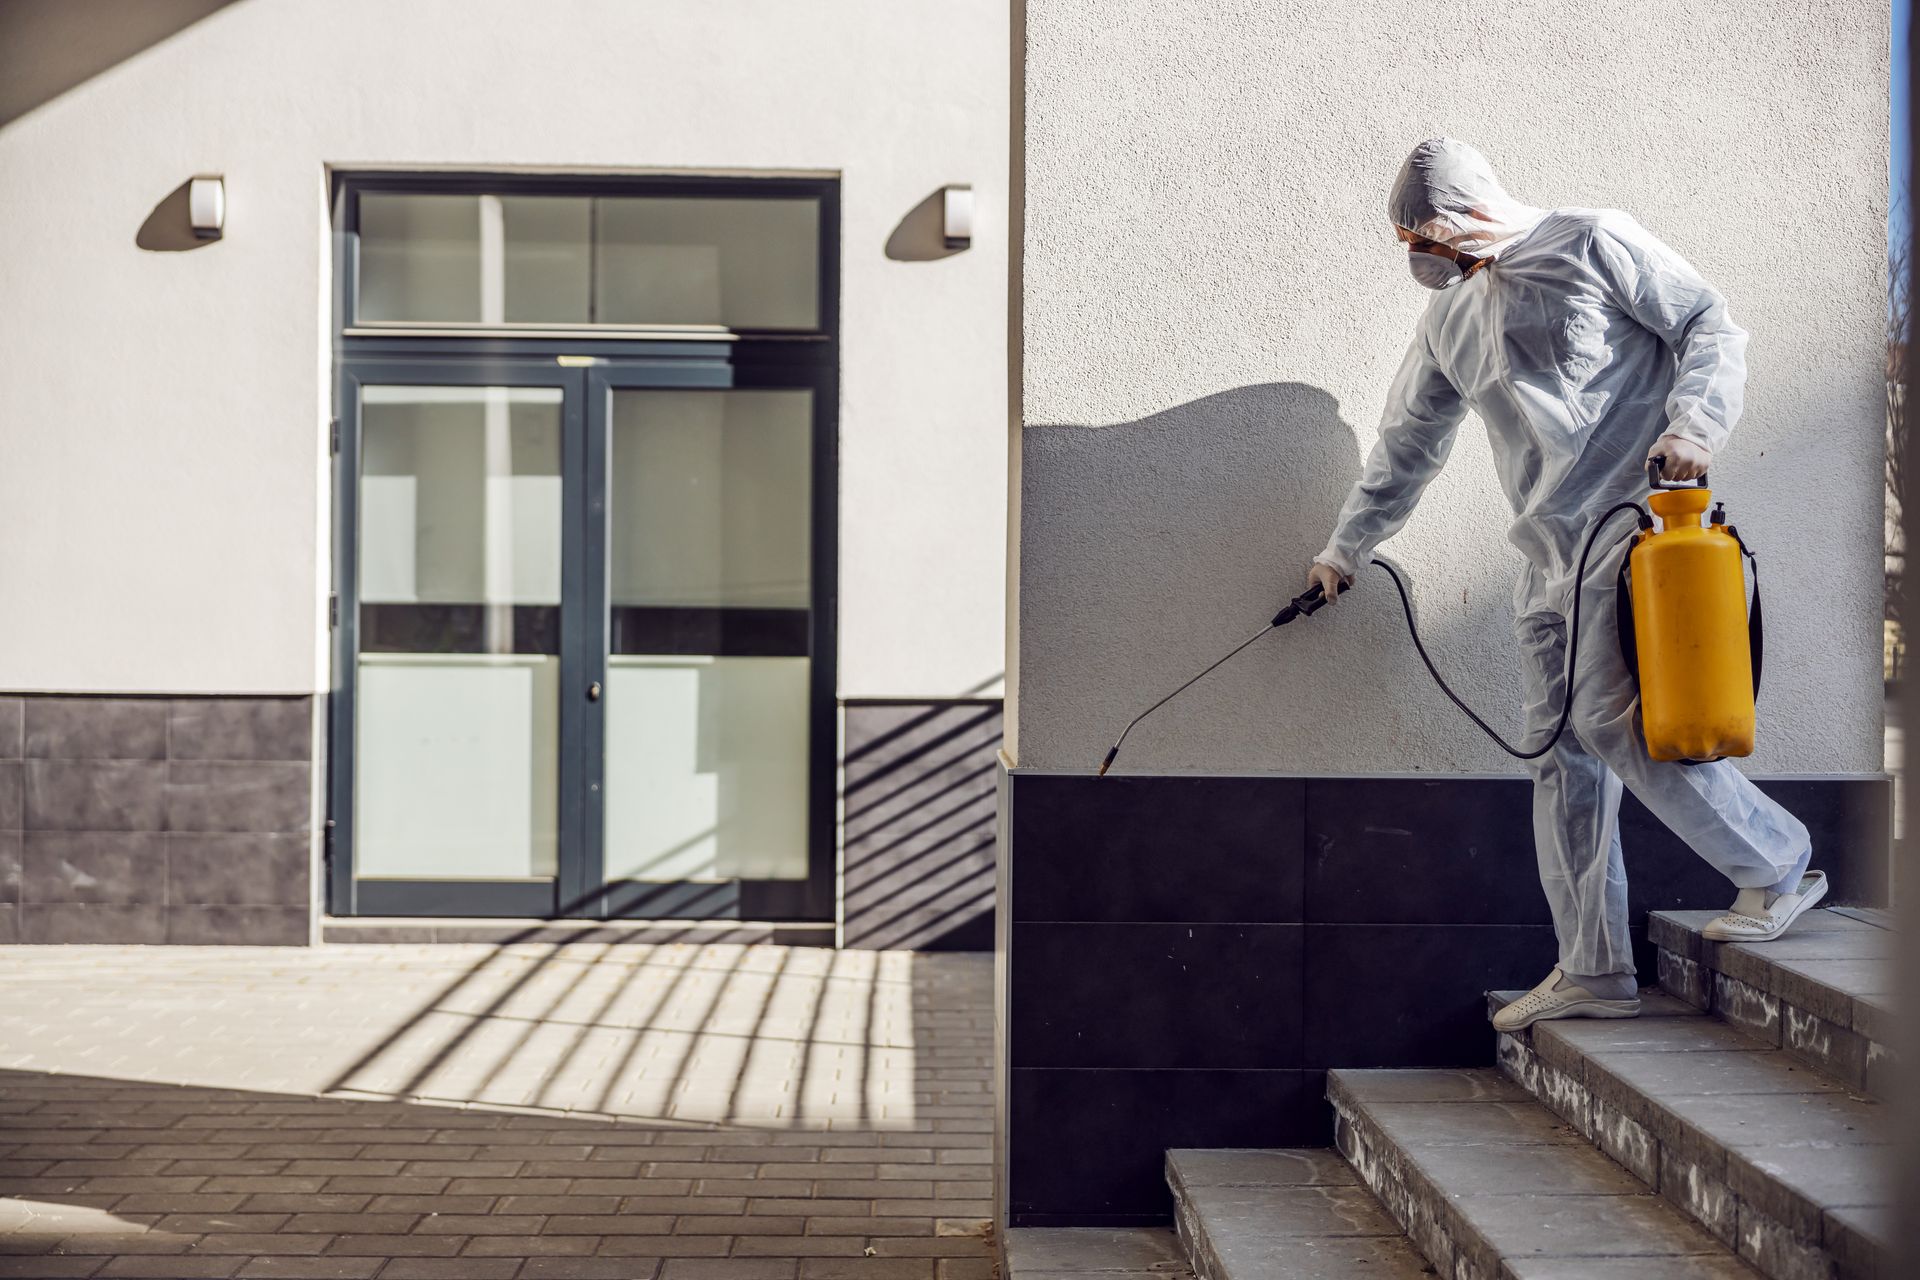 A man in a protective suit is spraying a wall with a sprayer.